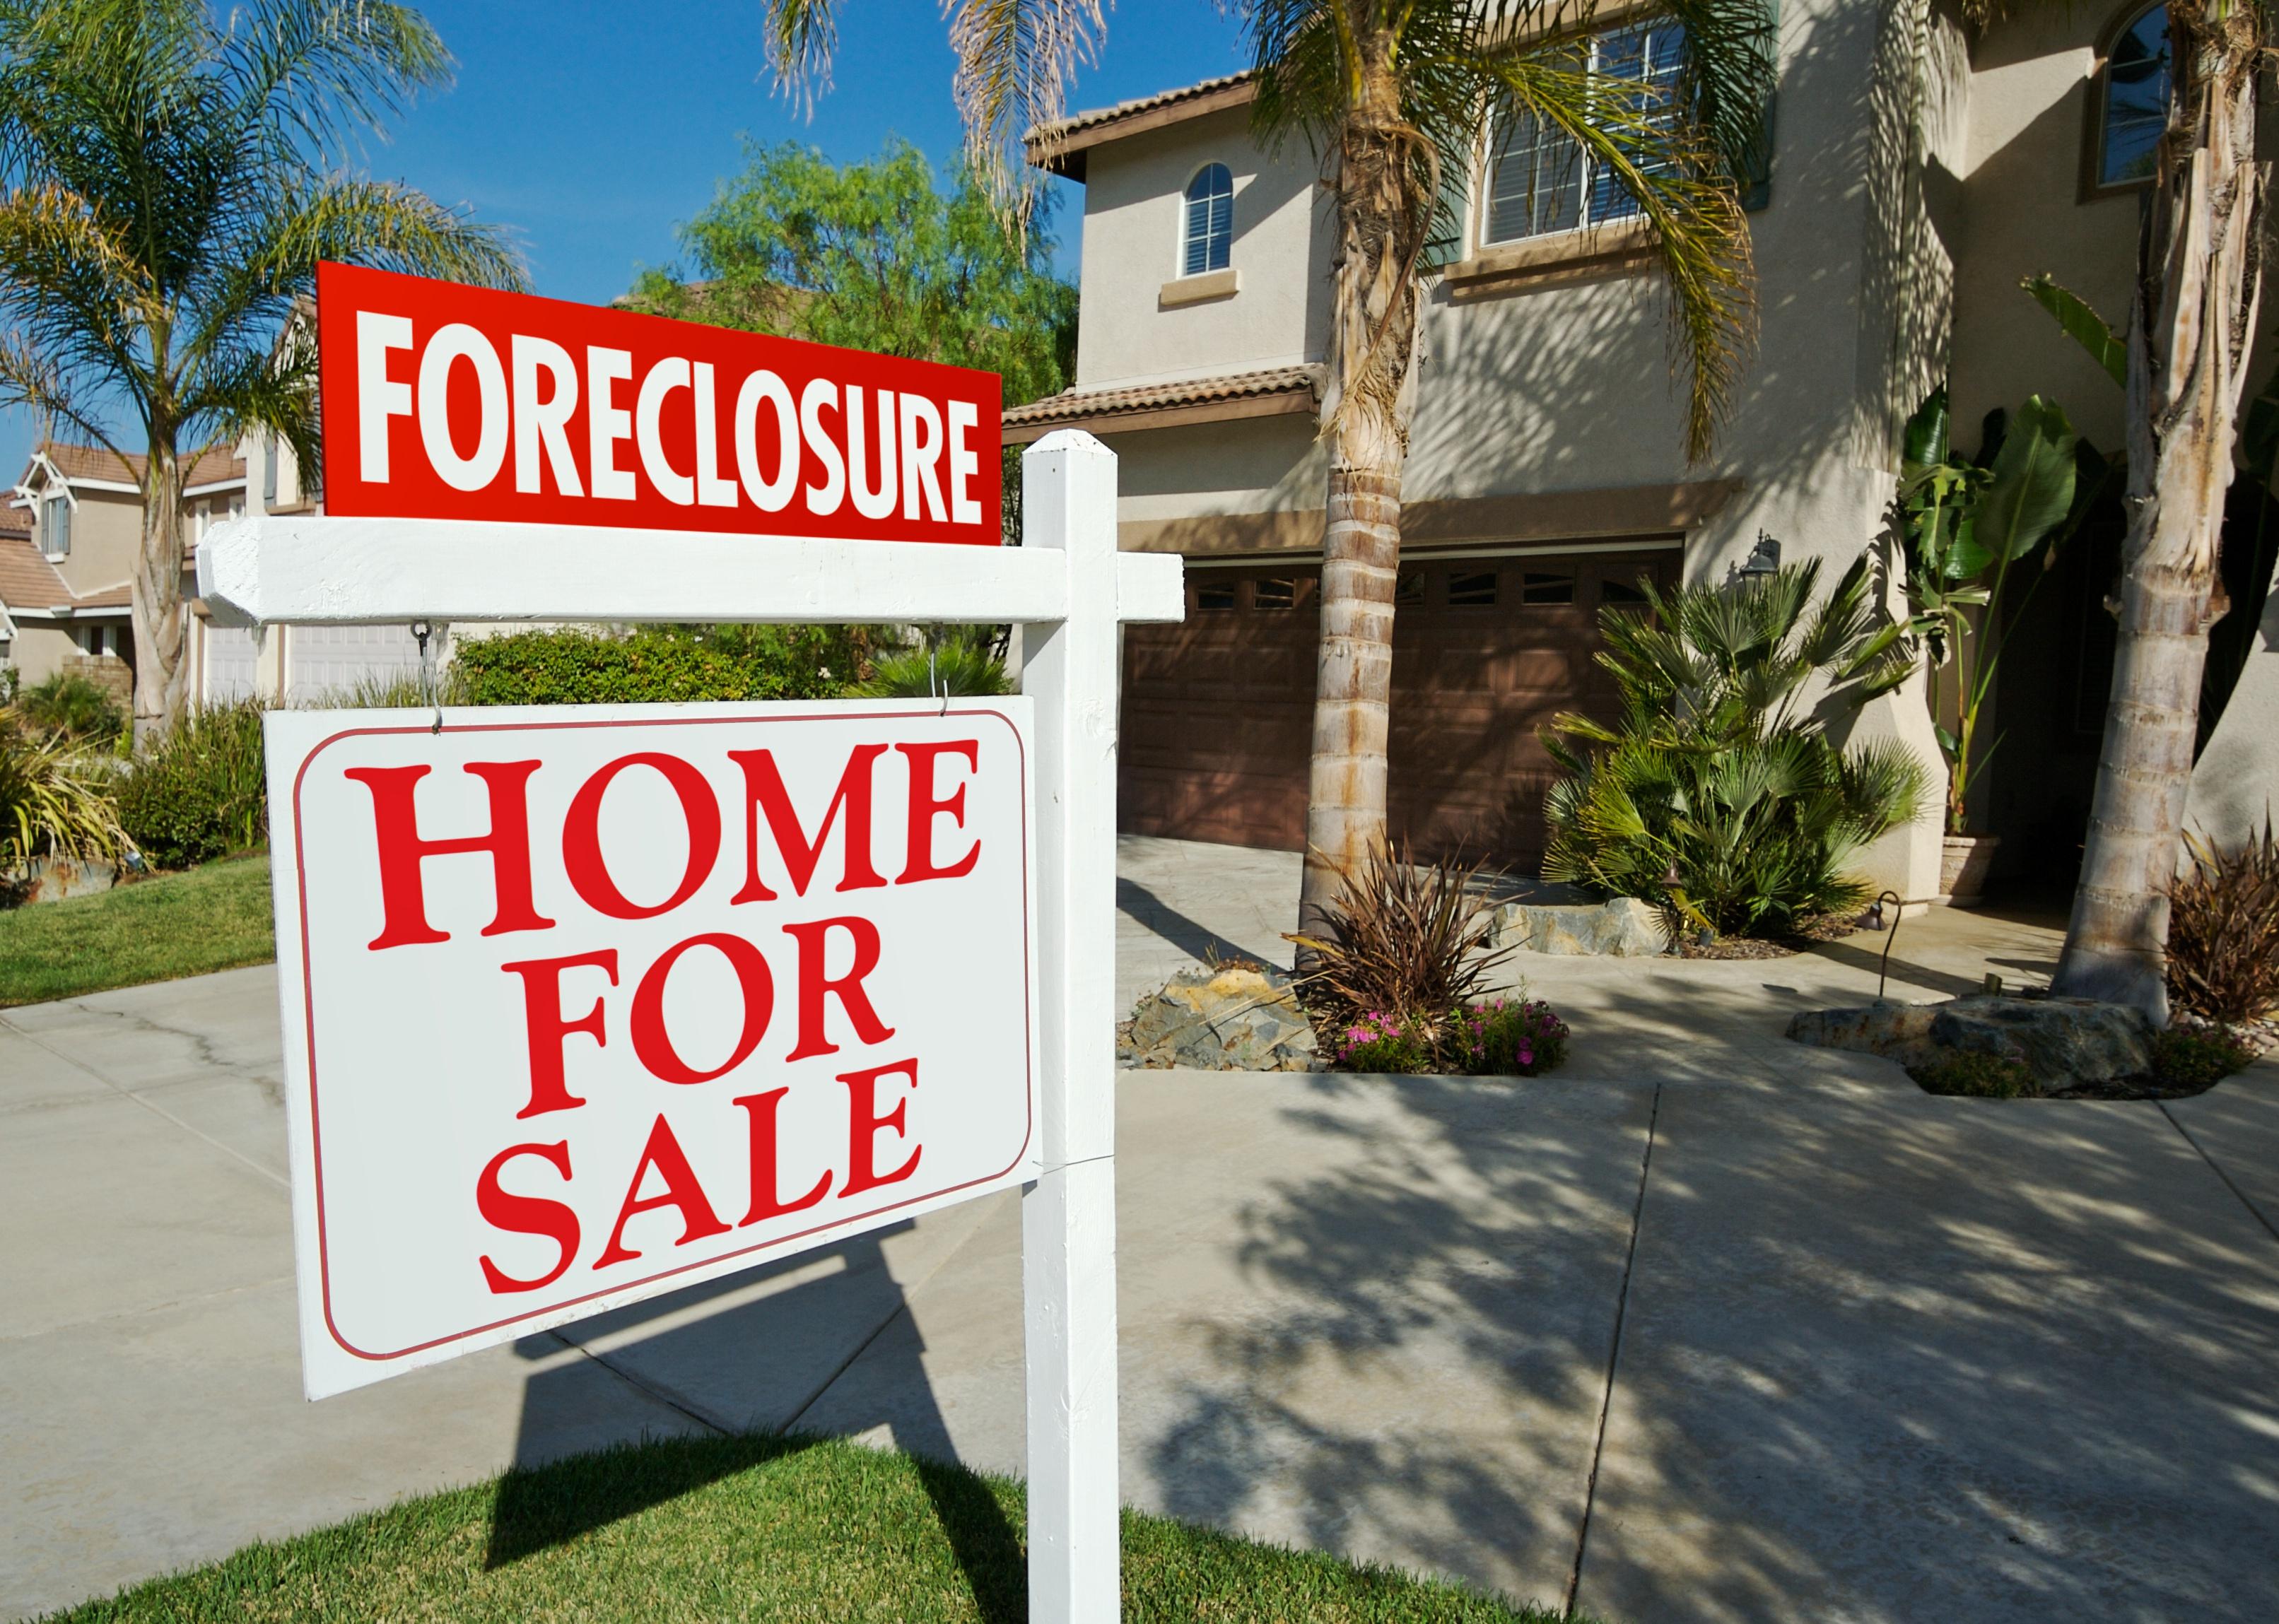 A brown stucco home with palm trees and a foreclosure sign in the front yard.